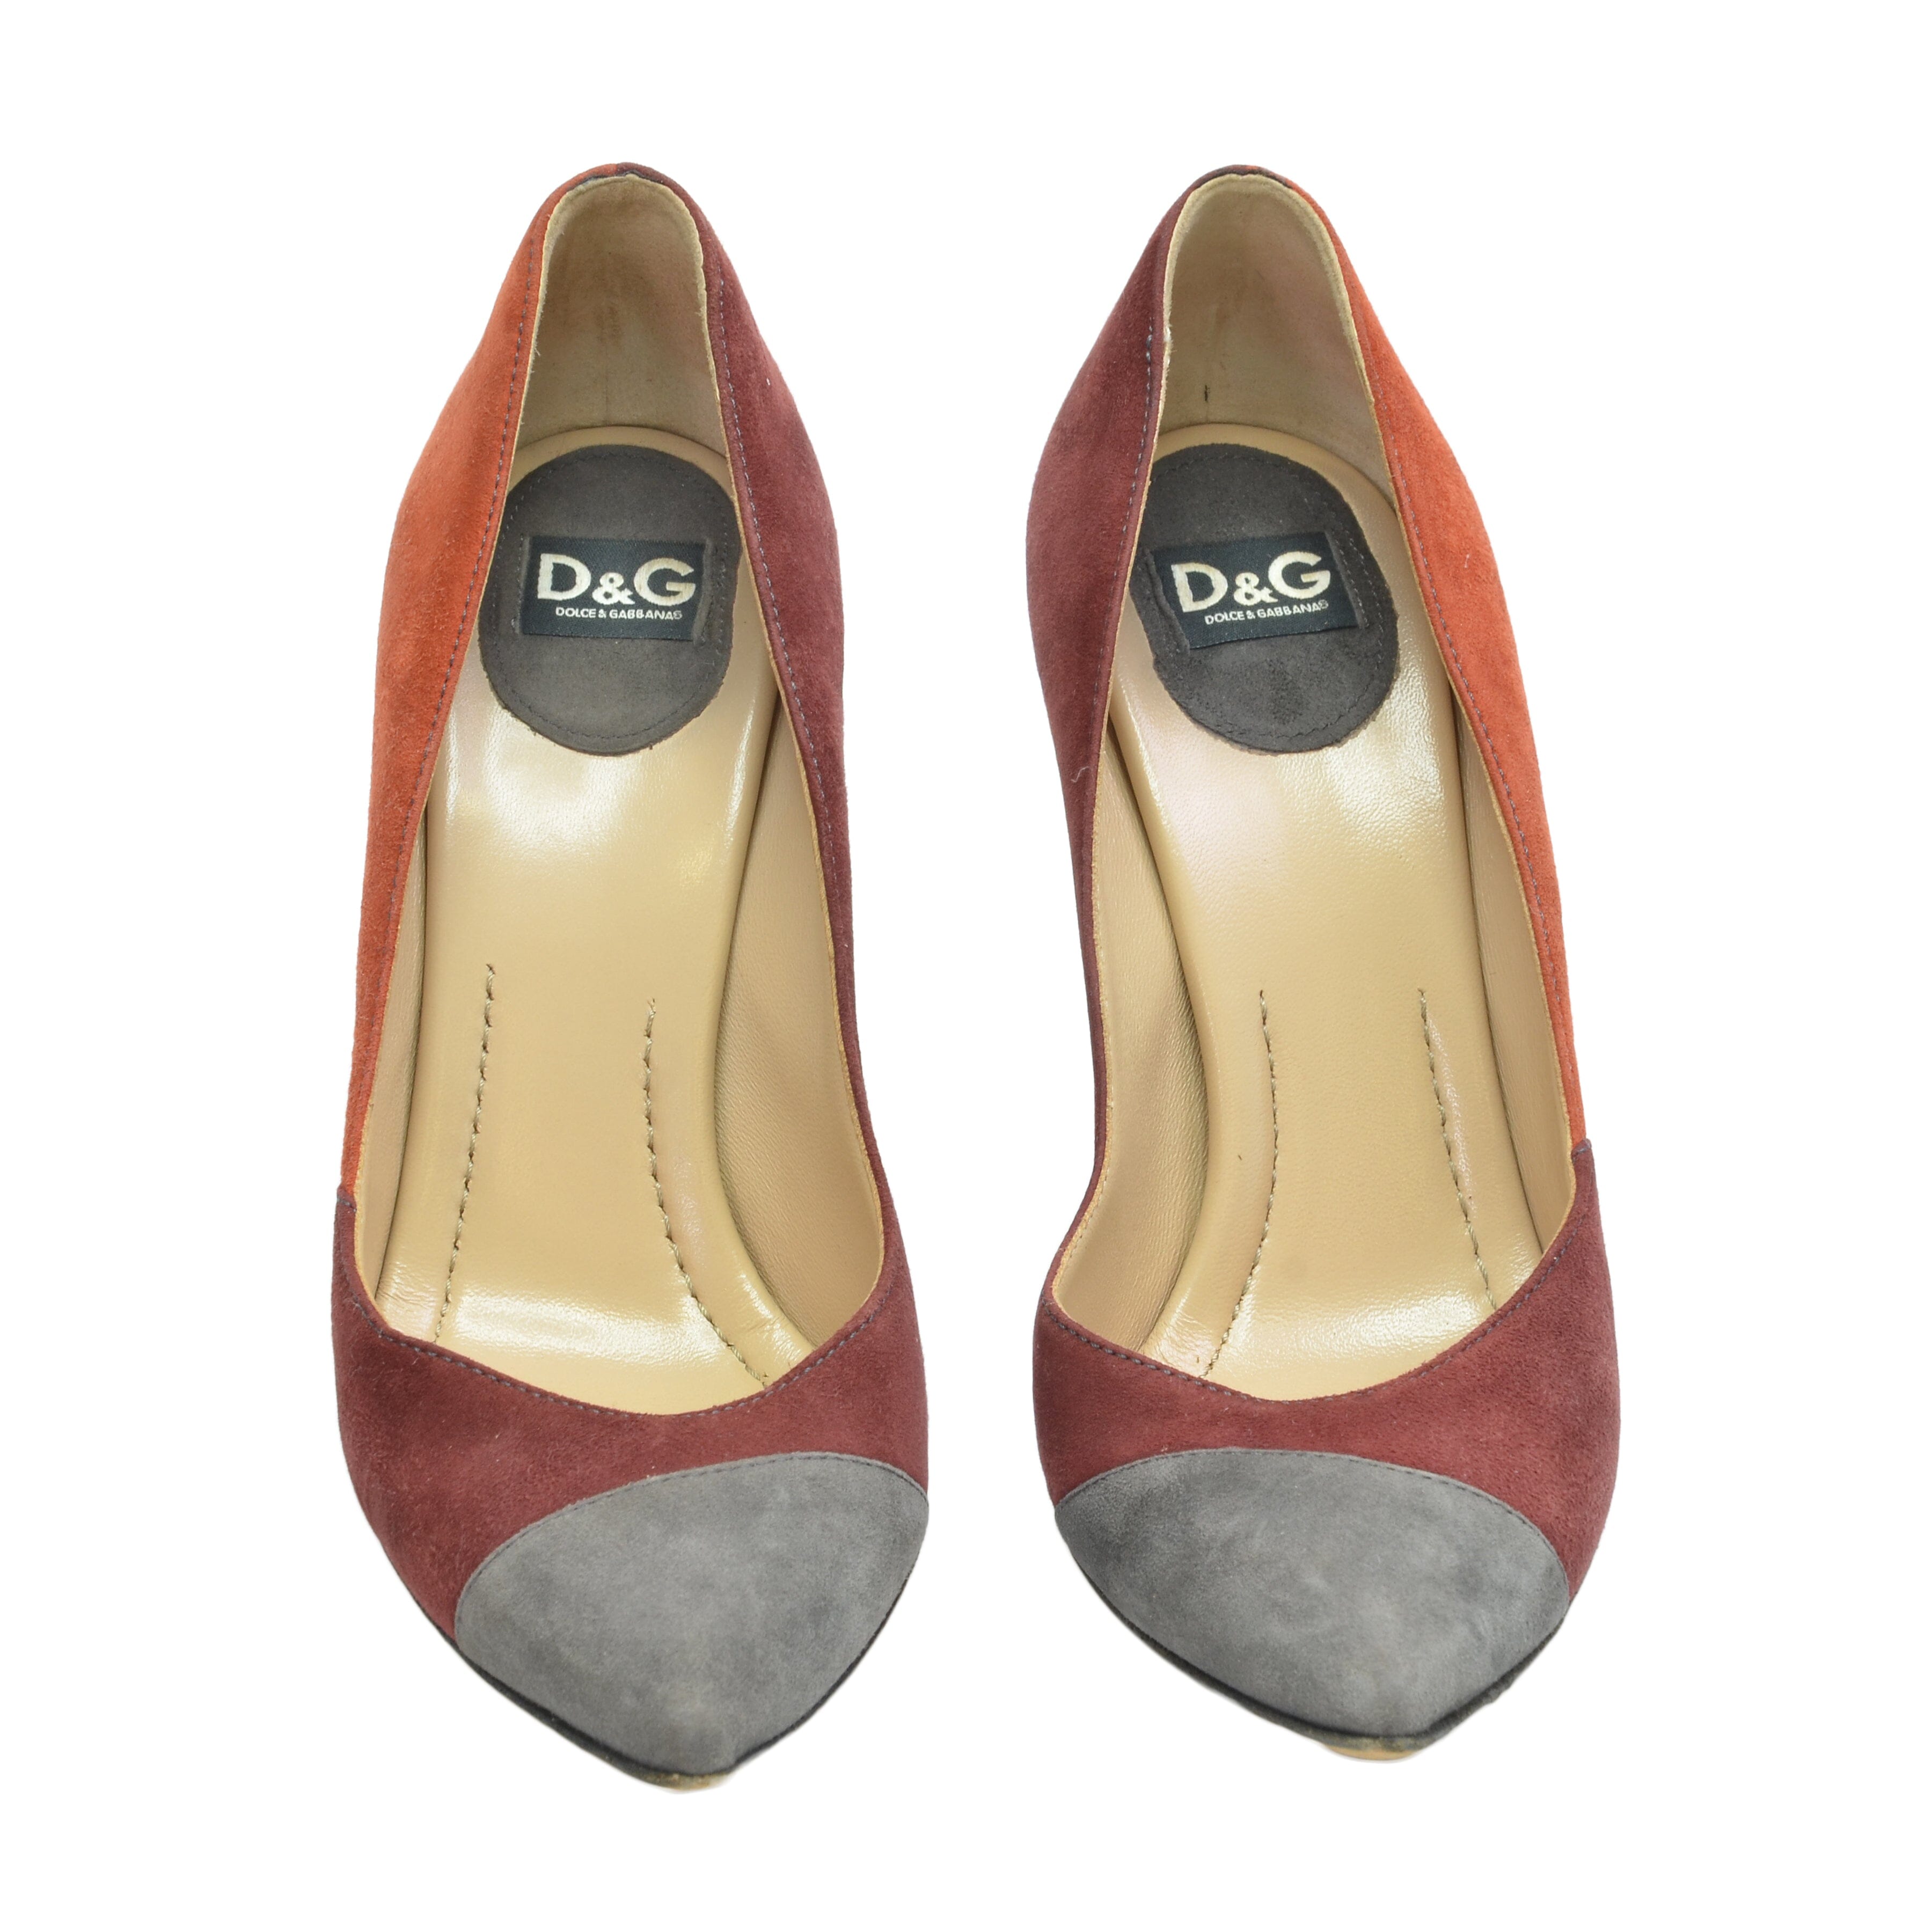 Multicolor Pointed Pumps Shoes Dolce & Gabbana